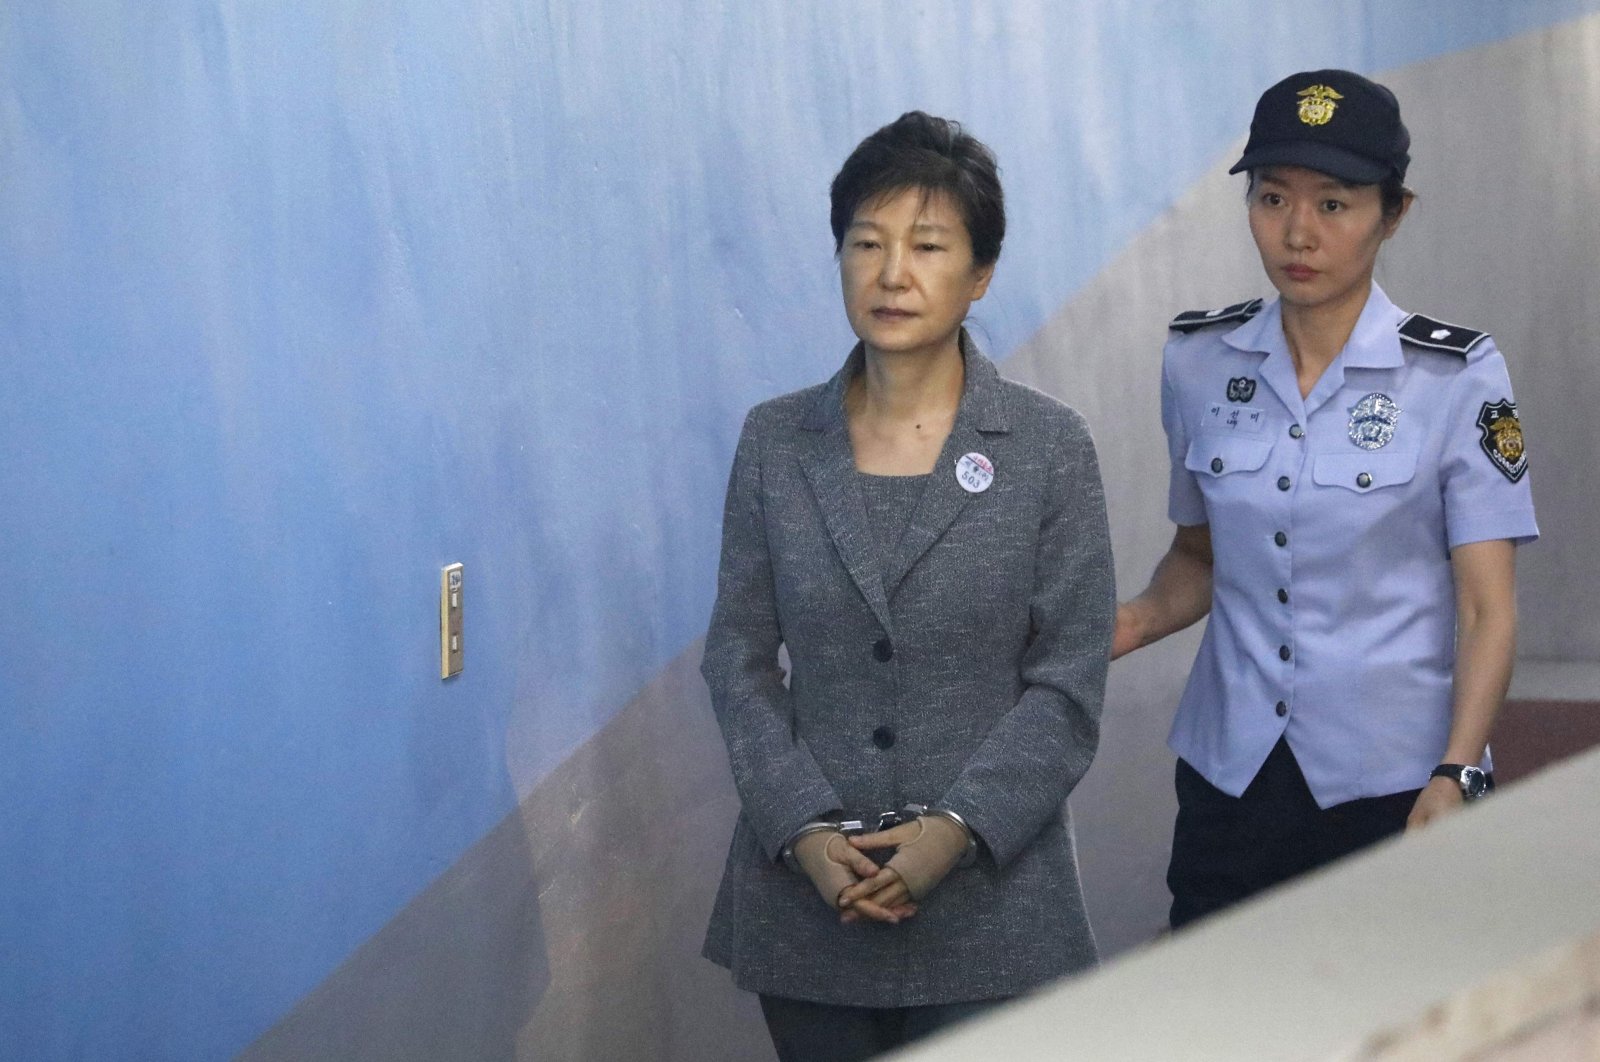 Former President Park Geun-hye (L) arrives at a court in Seoul, South Korea, Aug. 25, 2017. (AFP File Photo)